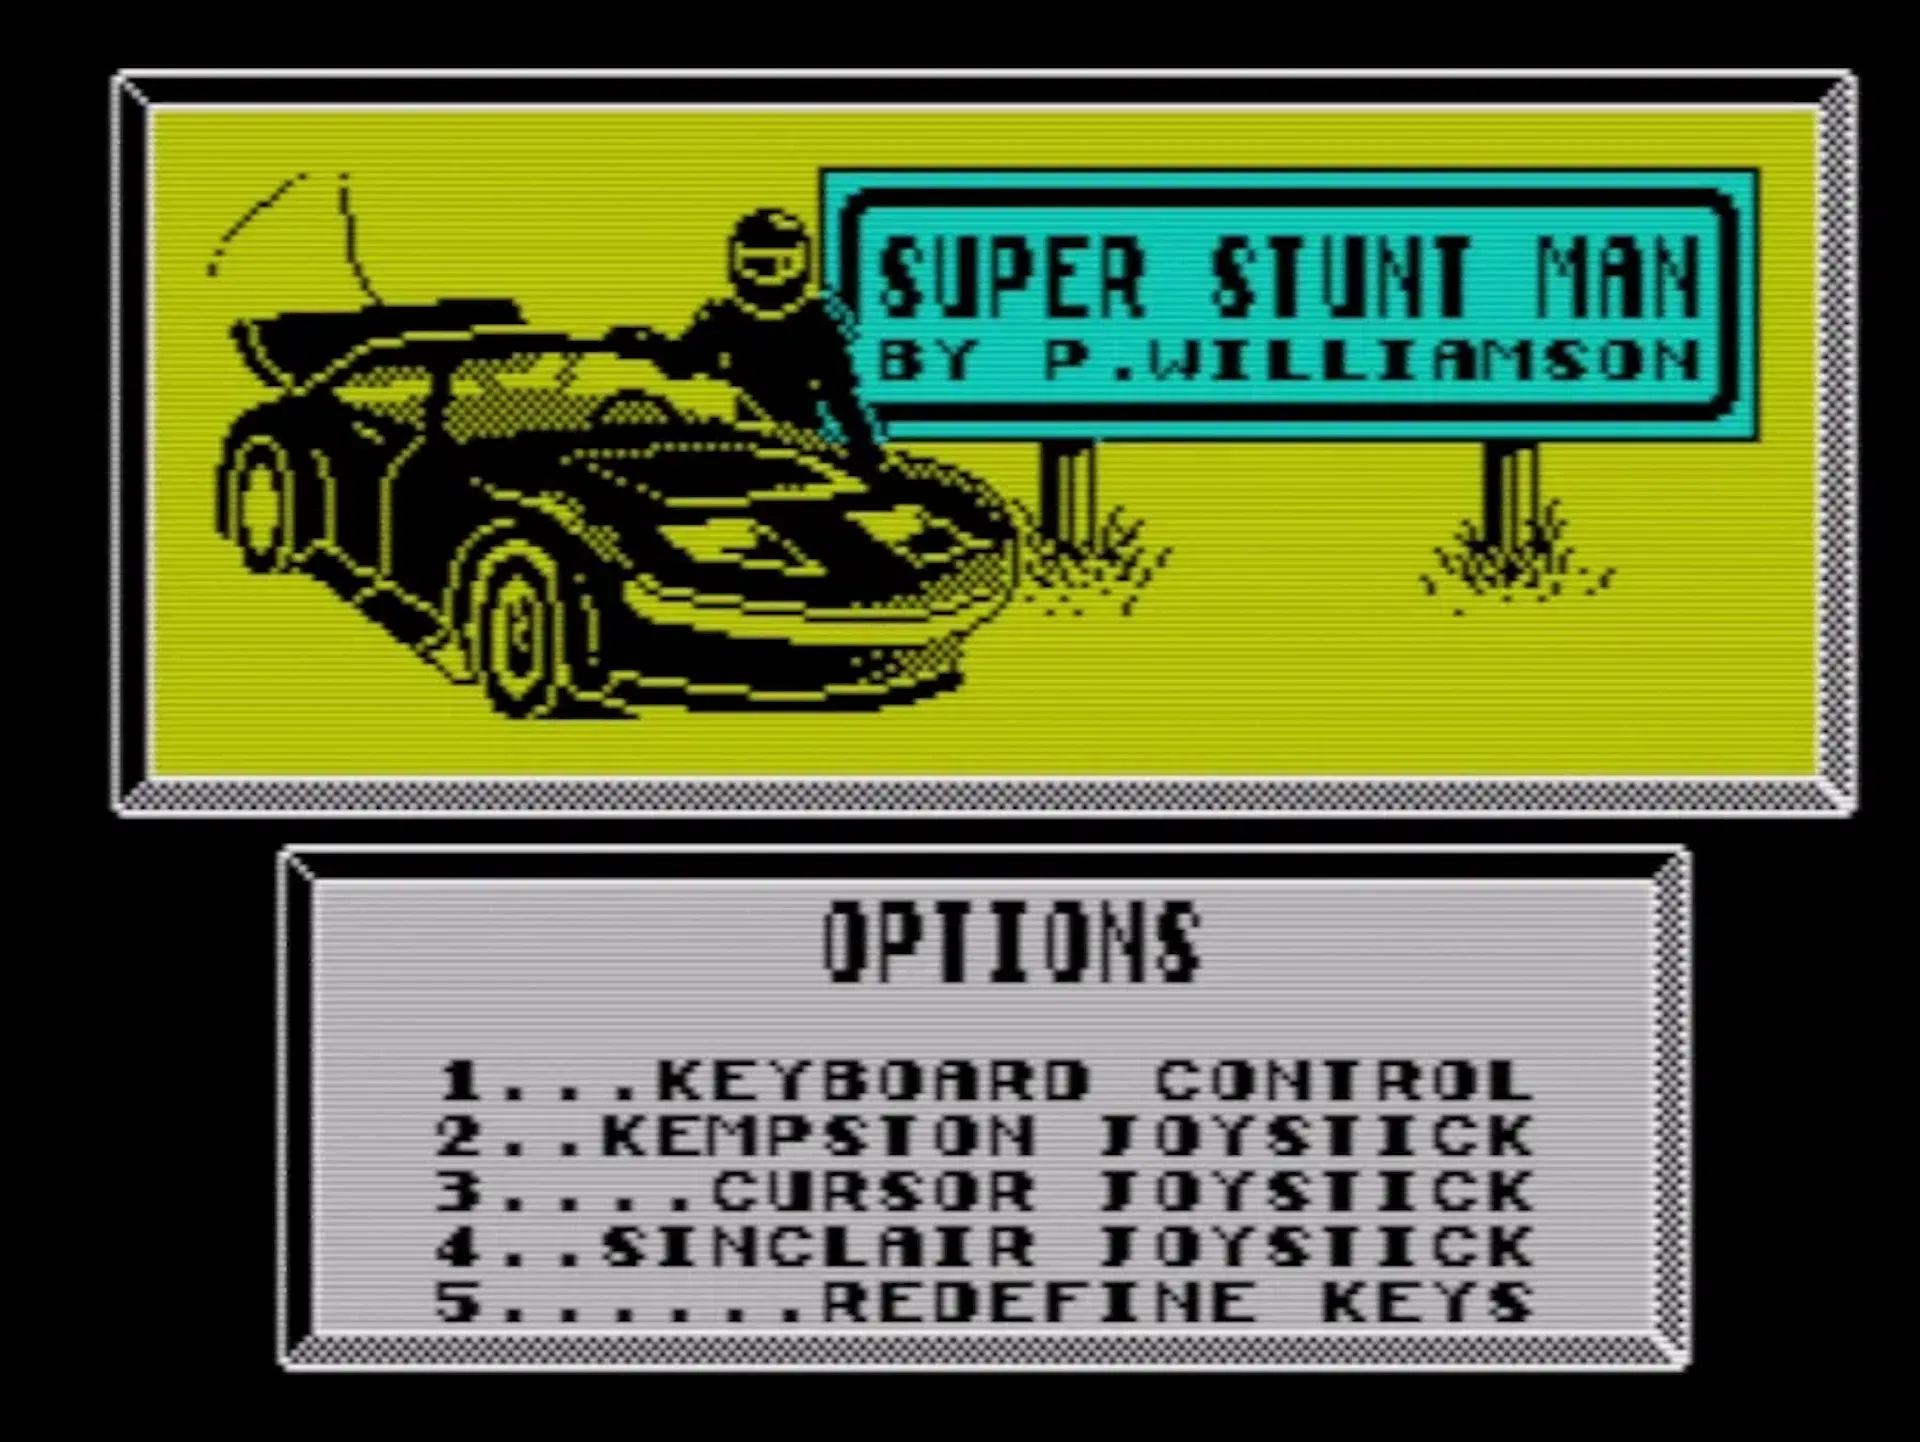 Wow, I didn't know the original Stig starred in his own videogame!